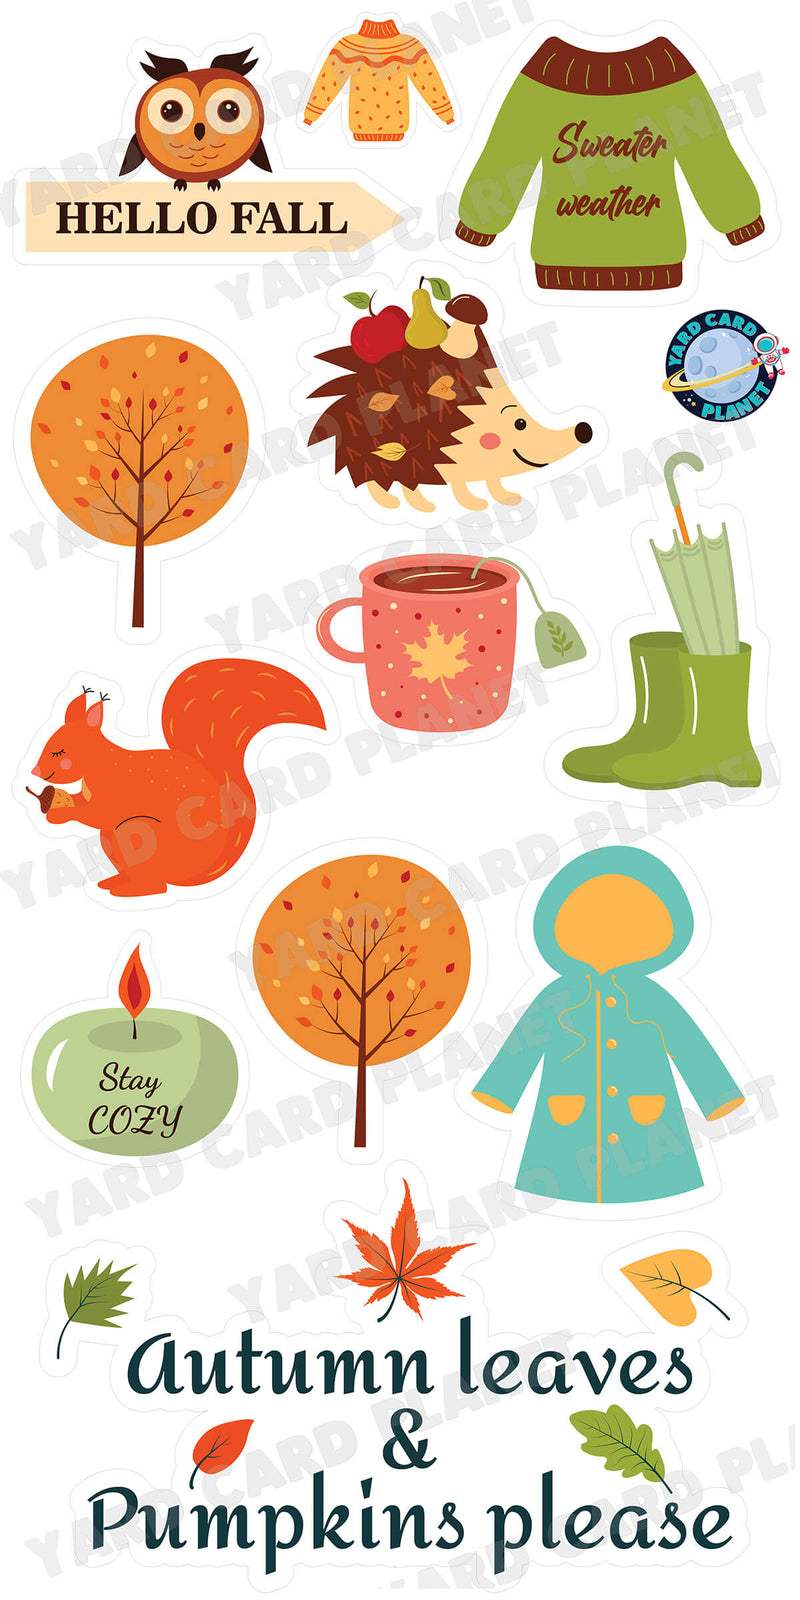 Hello Fall Sweater Weather EZ Quick Sign and Yard Card Flair Set